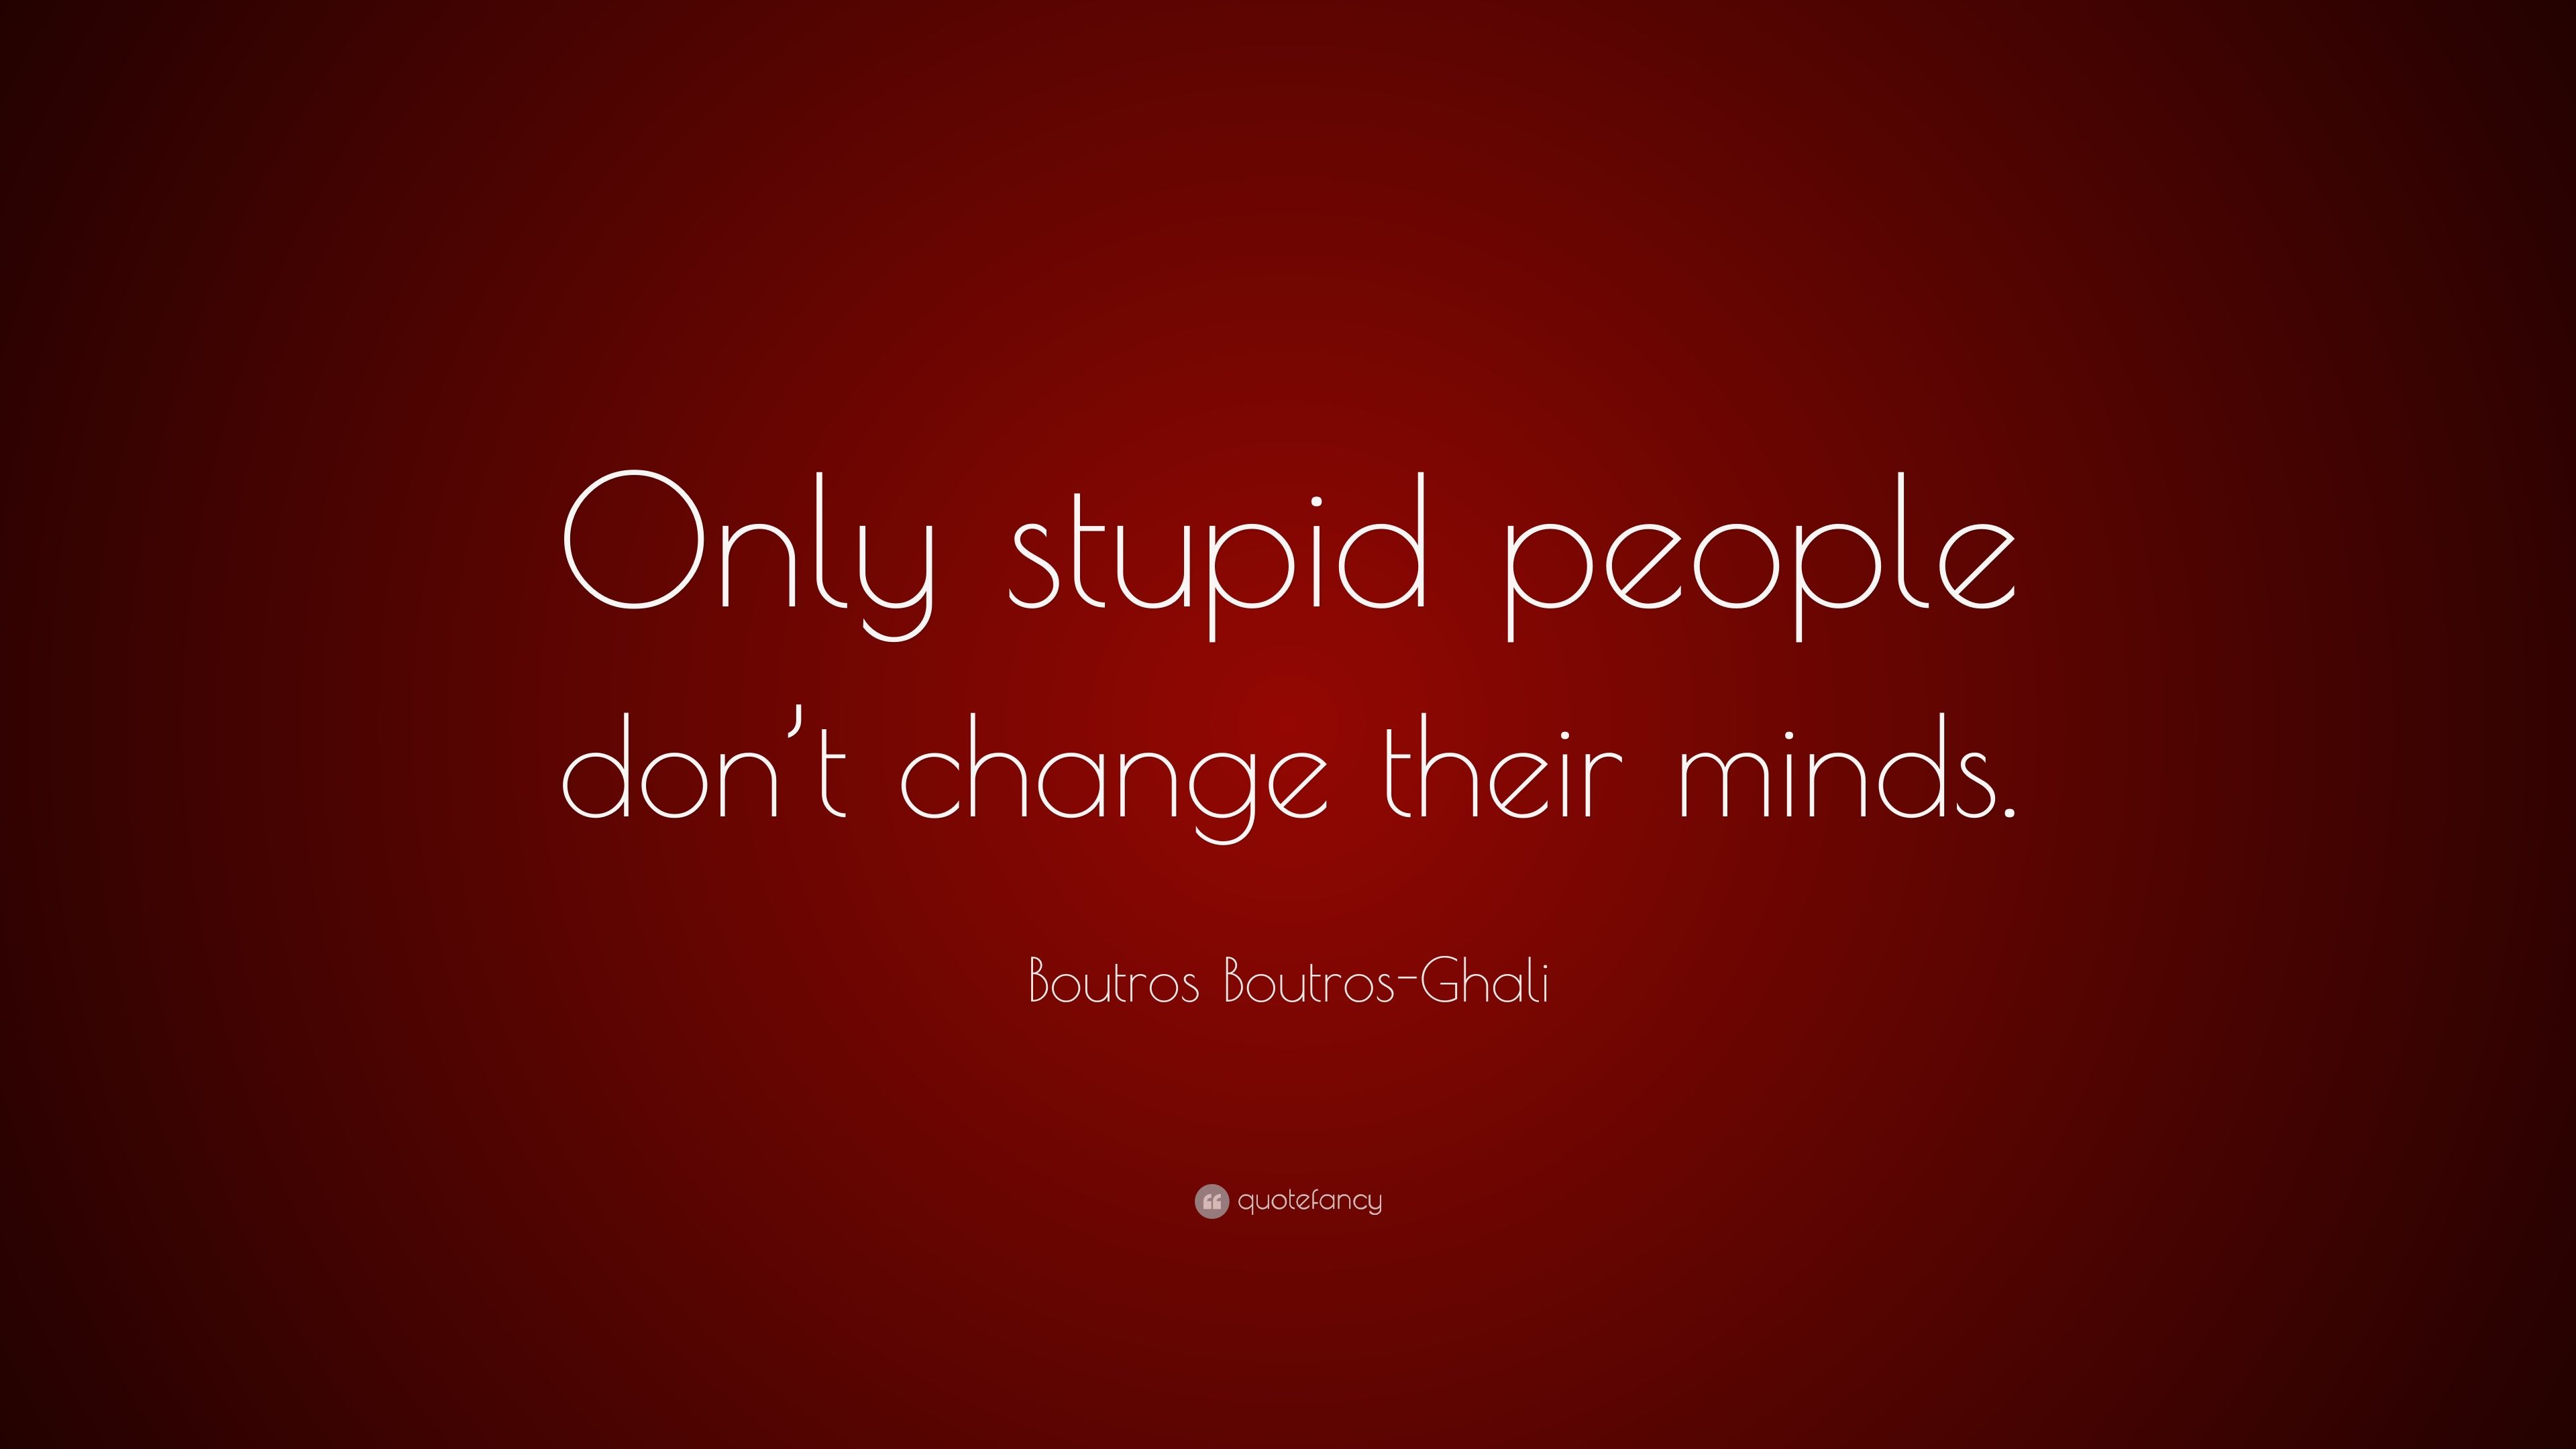 Boutros Boutros Ghali Quote: “Only Stupid People Don't Change Their Minds.” (7 Wallpaper)